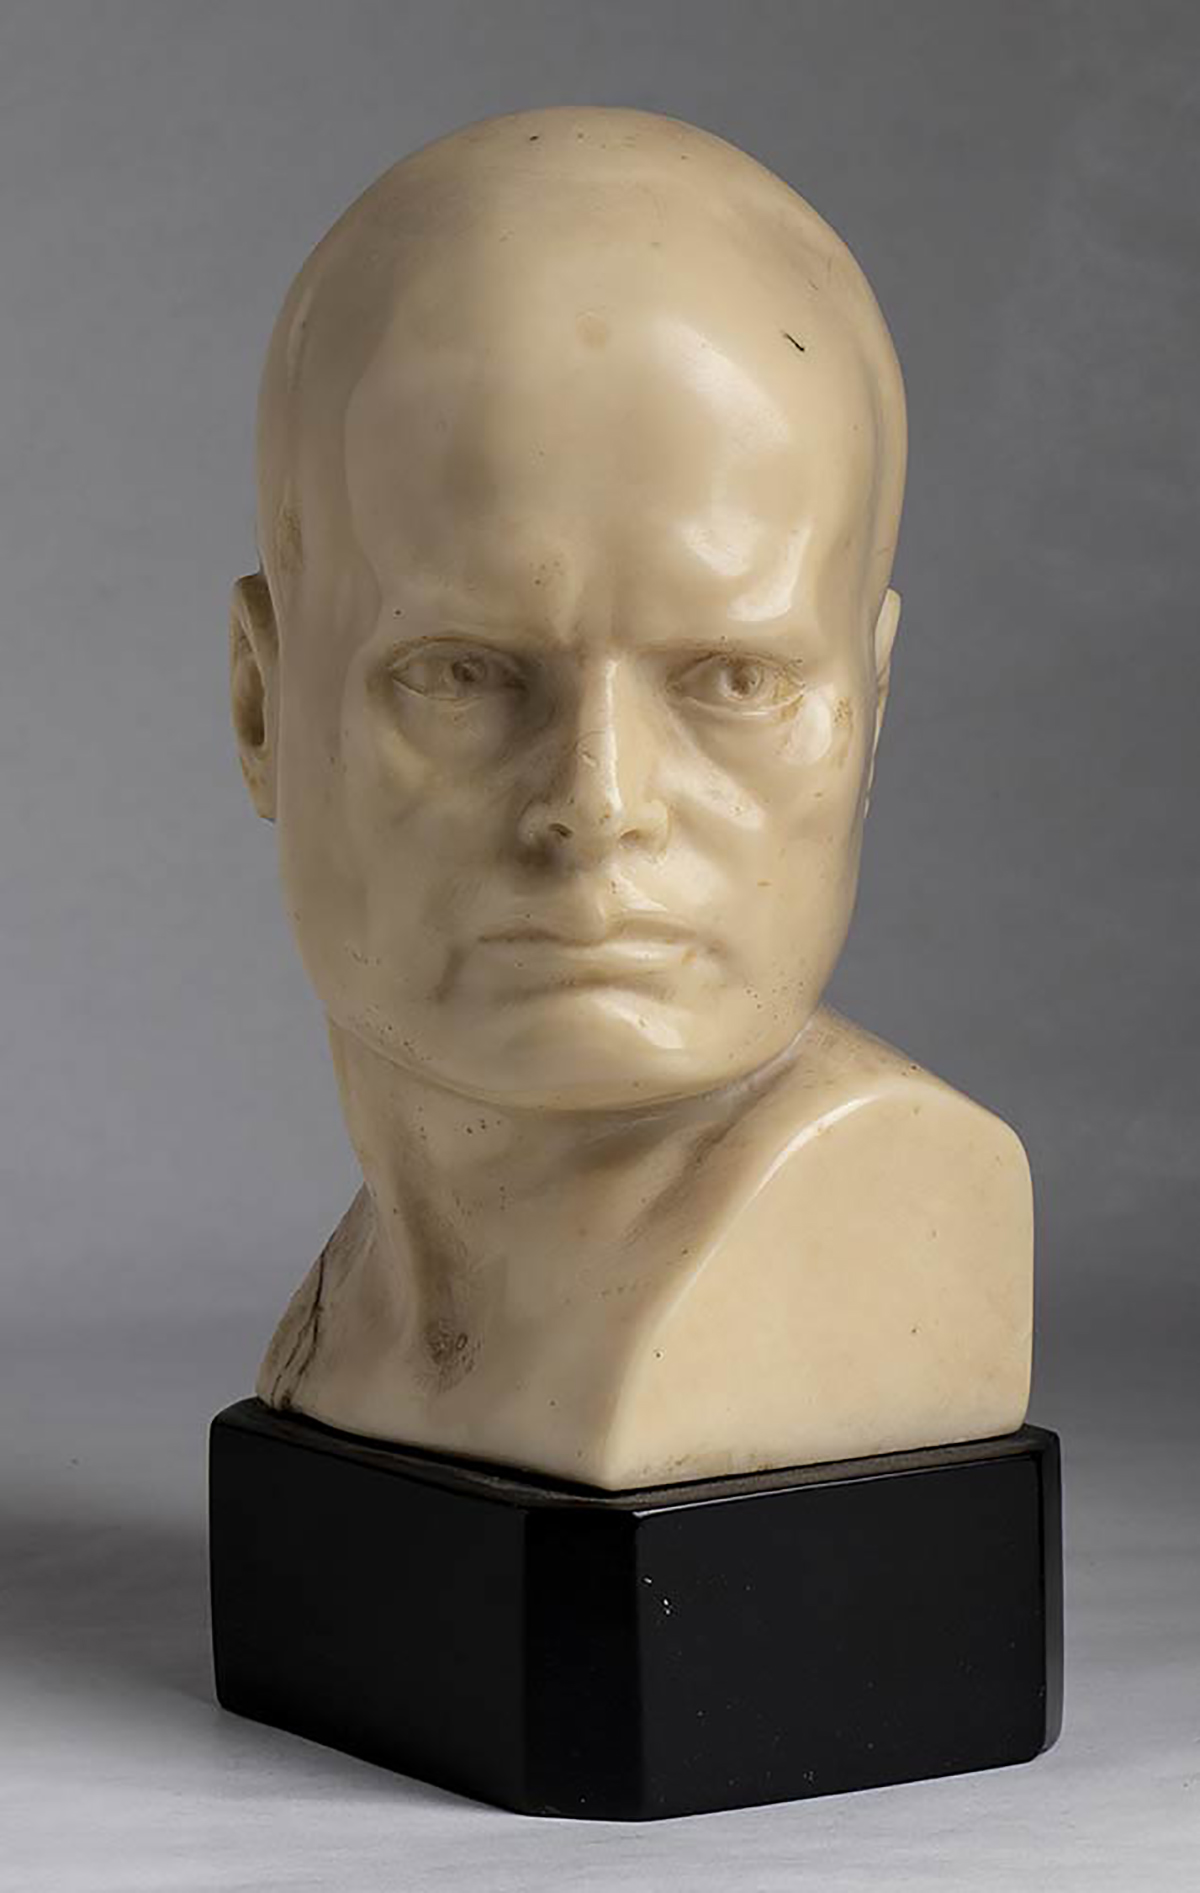 A small Benito Mussolini head, ivory paste ivory paste A small Benito Mussolini’s head, ivory paste, - Image 4 of 4